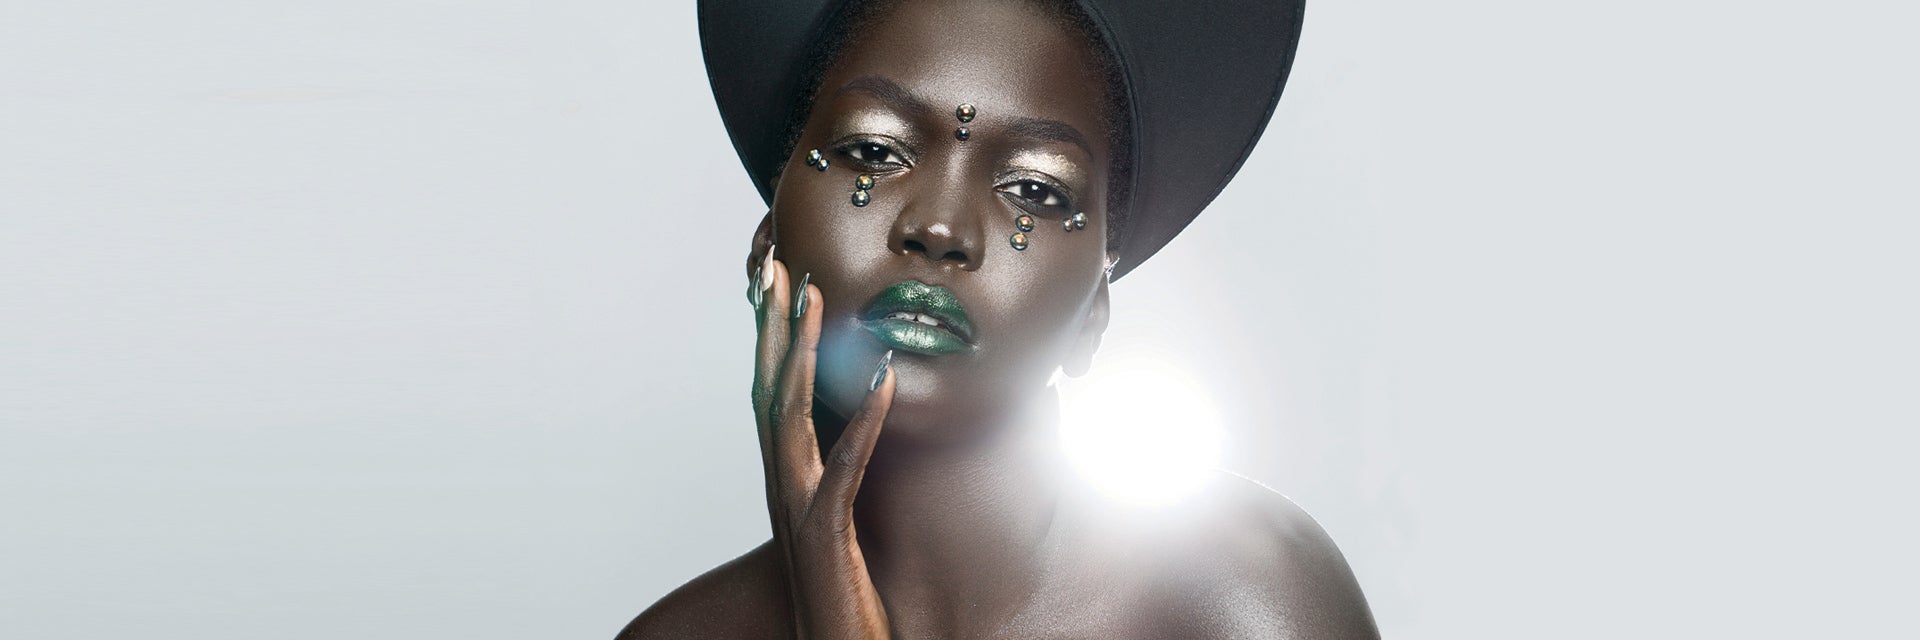 6 Black Makeup Artists Talk About Adjusting To The 'New Normal' Amid Coronavirus Pandemic